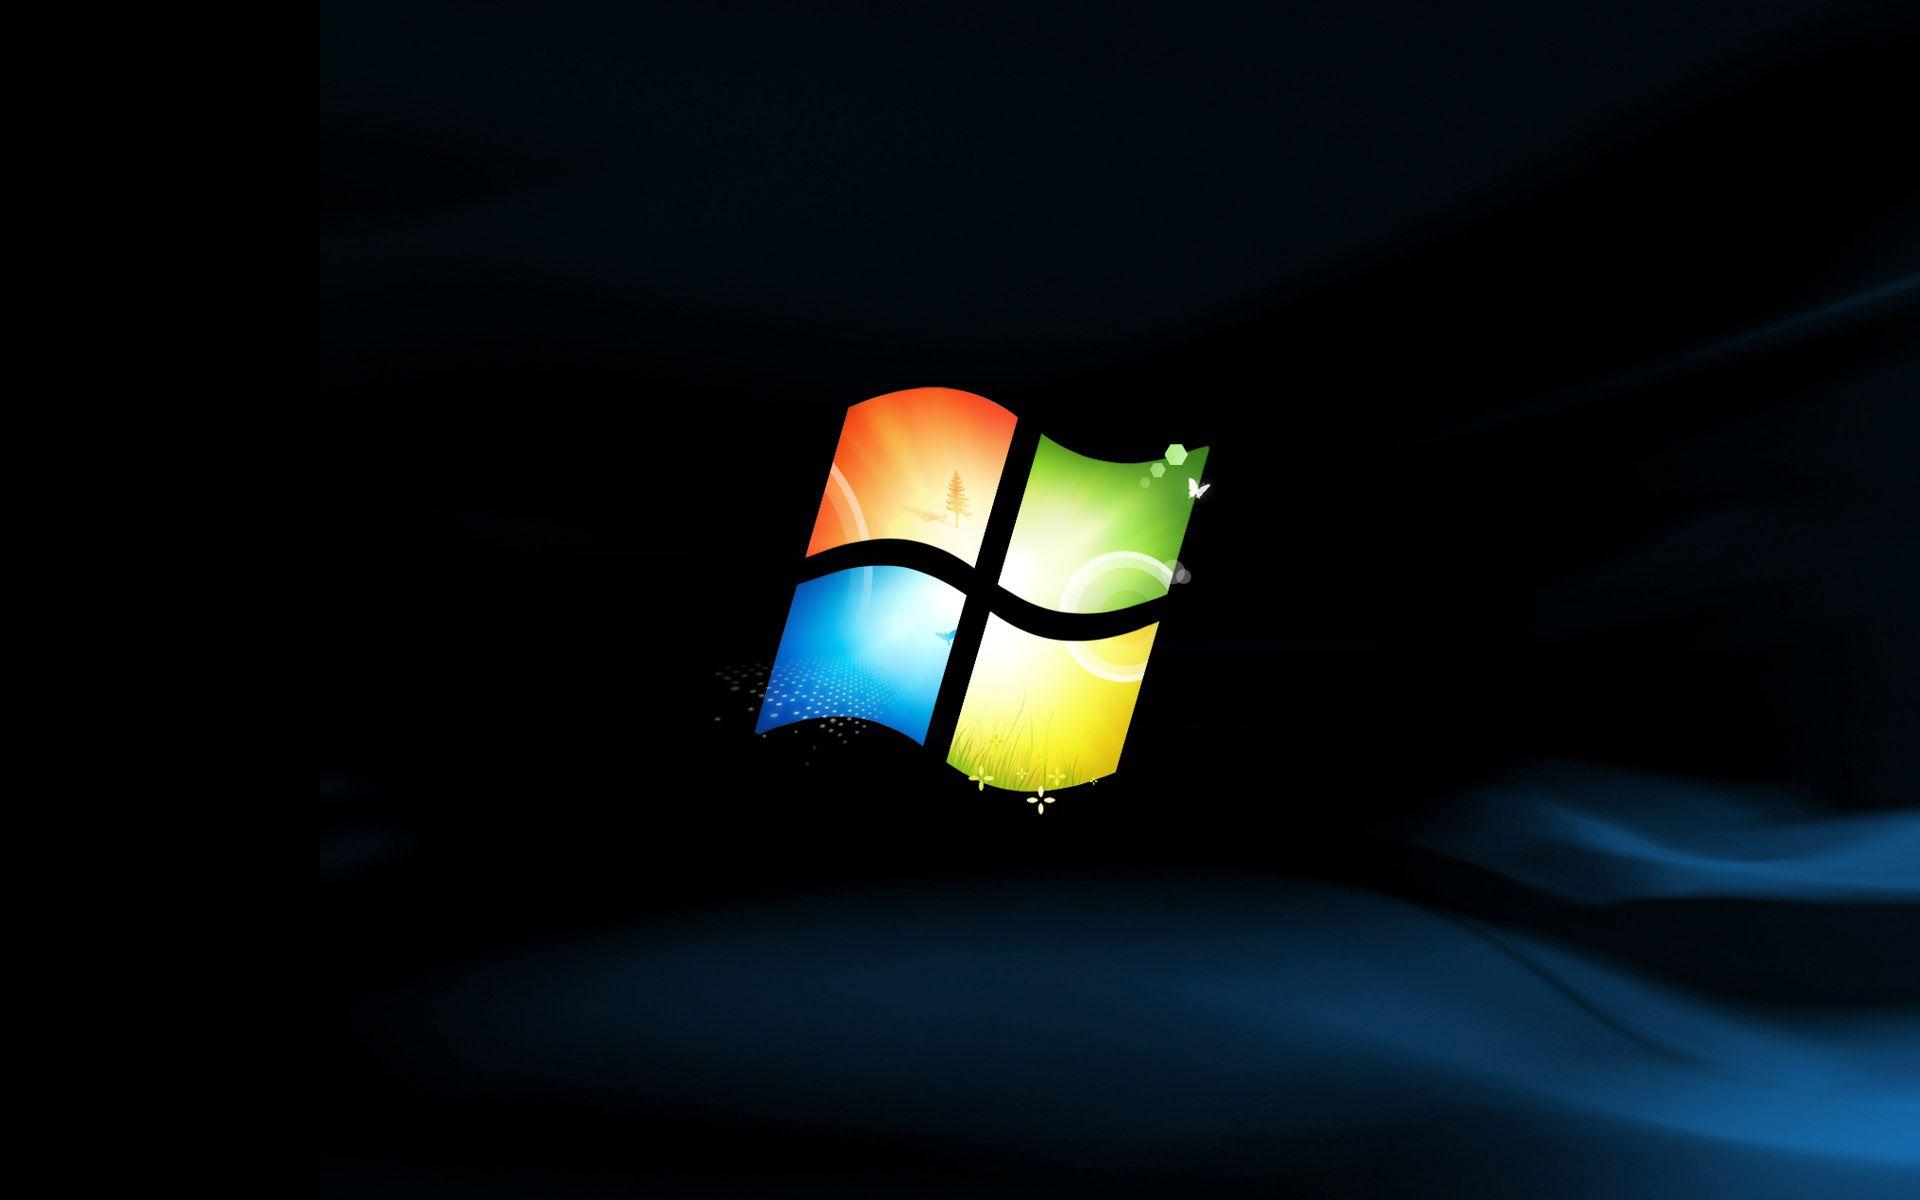 Windows Computer Wallpapers - Top Free Windows Computer Backgrounds ...